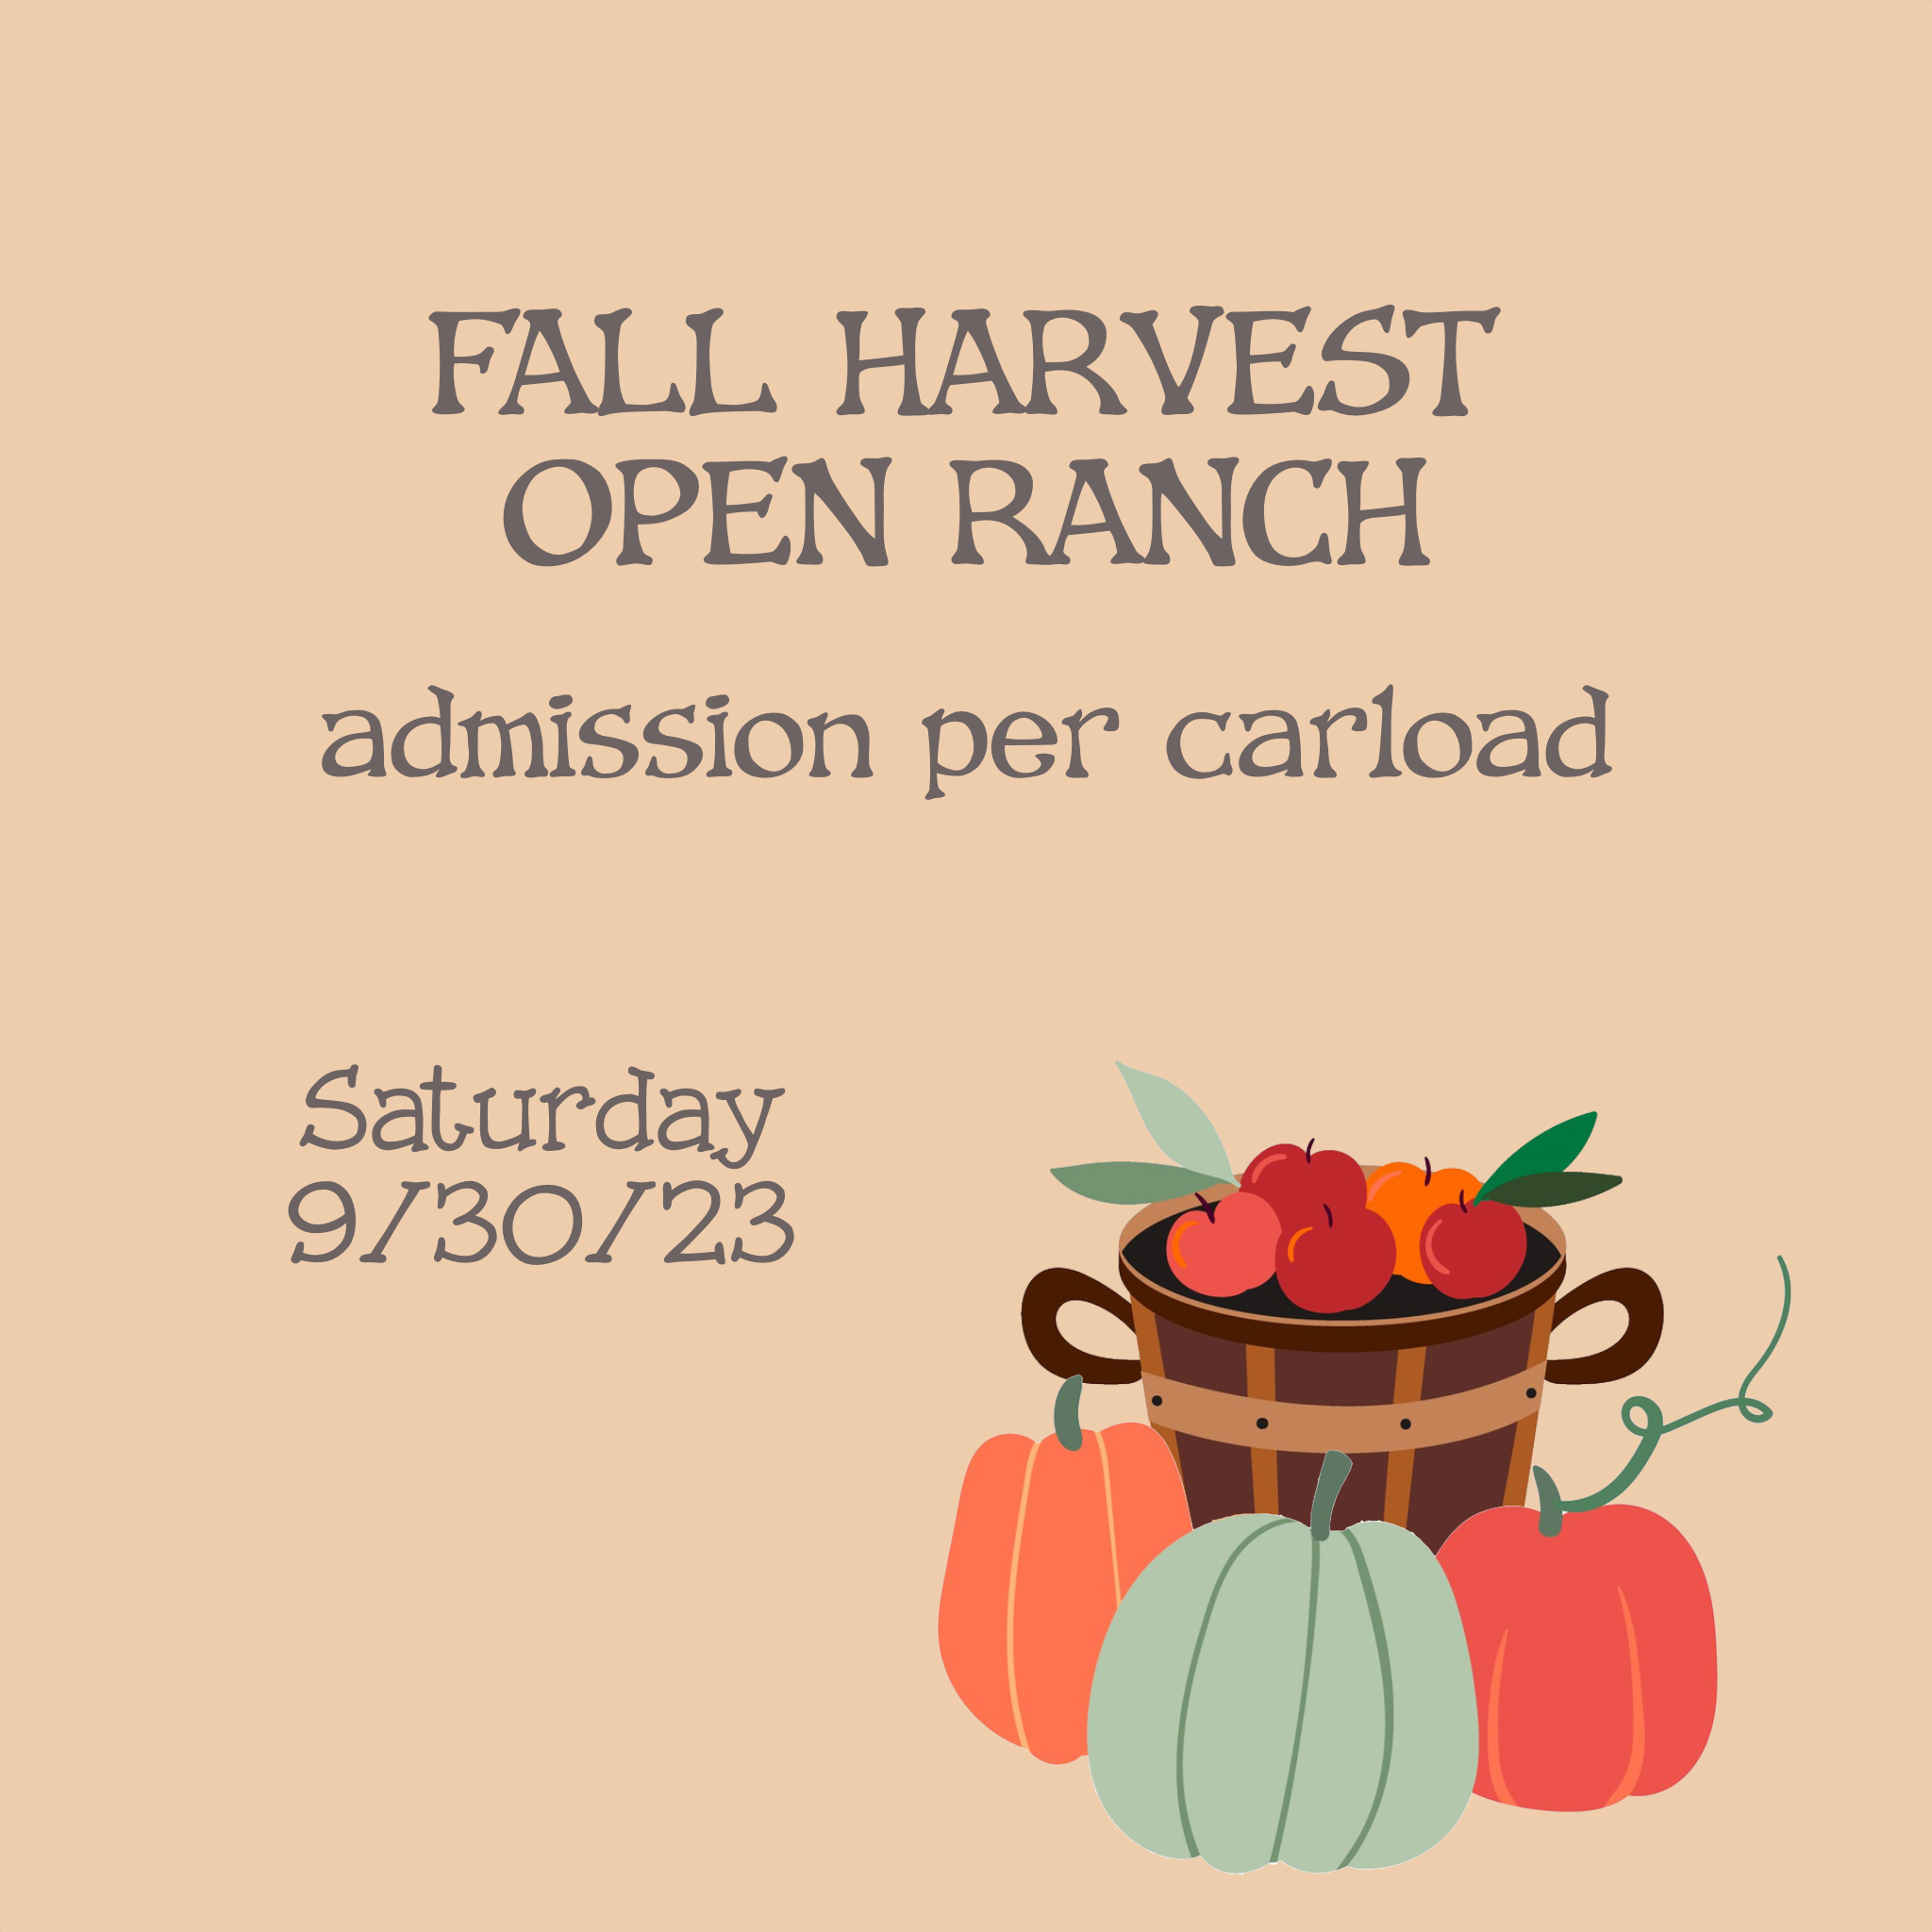 Fall Harvest Open Ranch Reservation